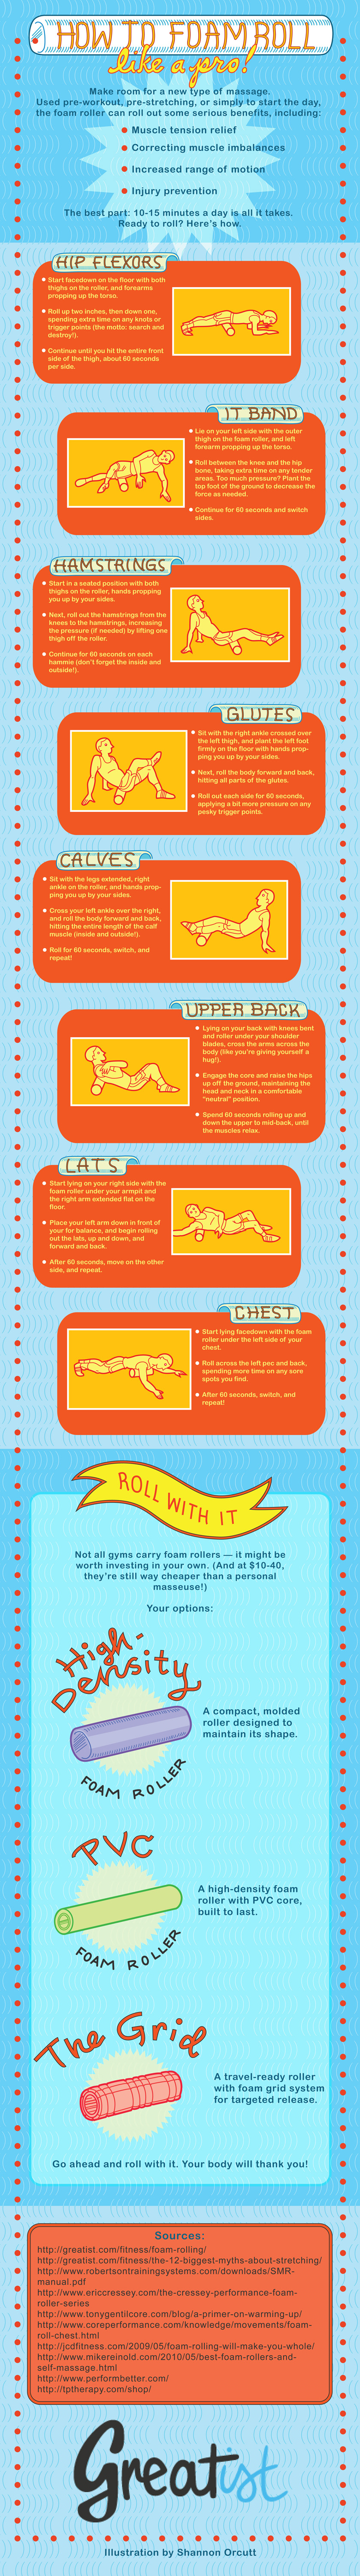 How To Use Foam Roller In Your Fitness Routine Infographic